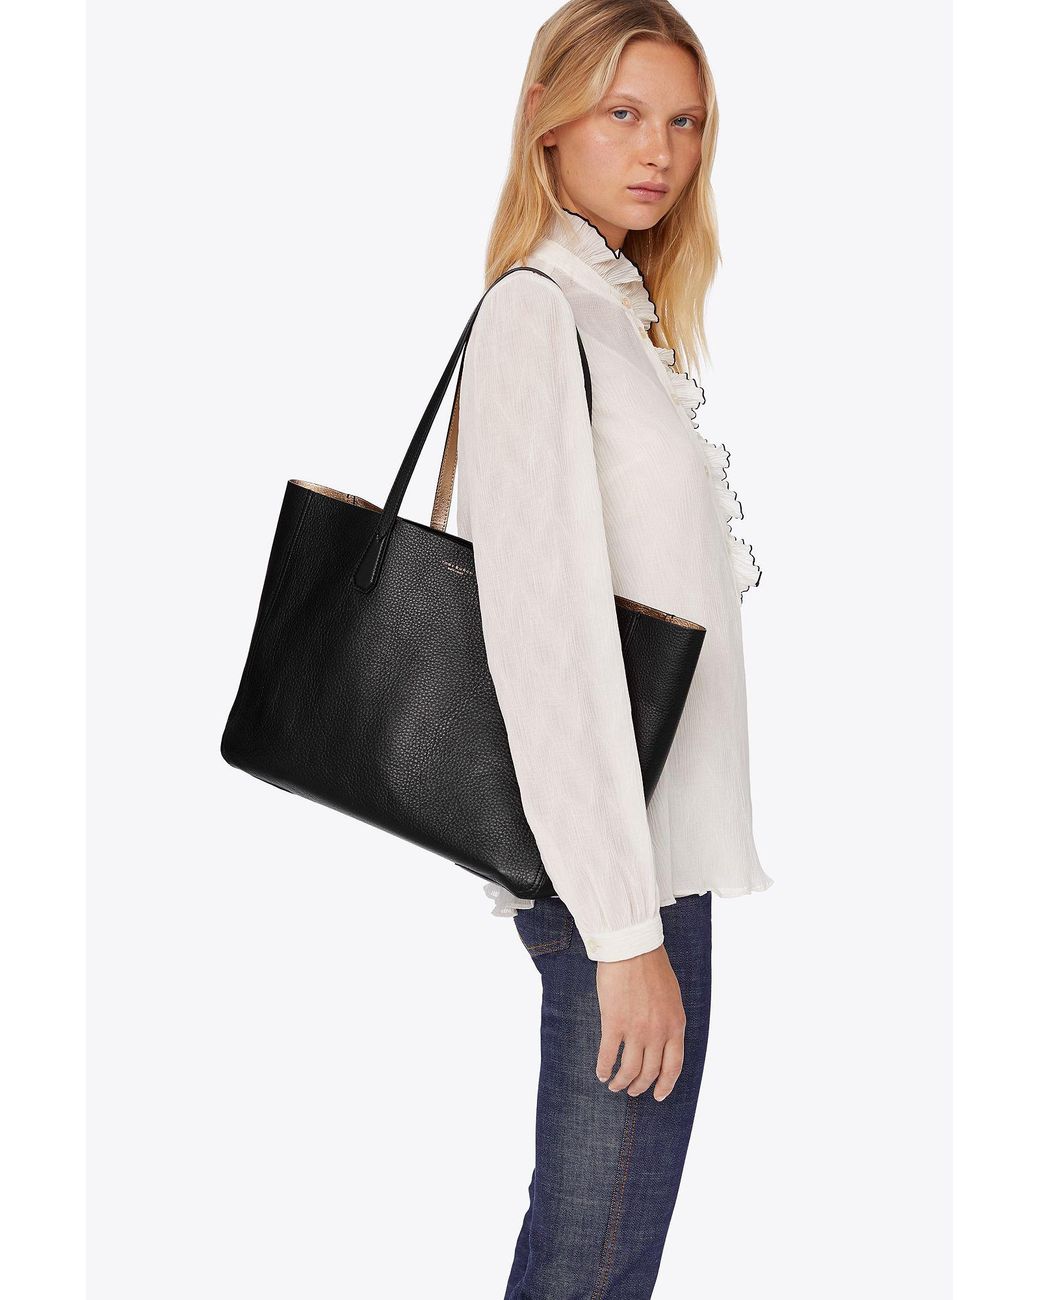 Tory Burch Reversible Tote - Dressed to Kill